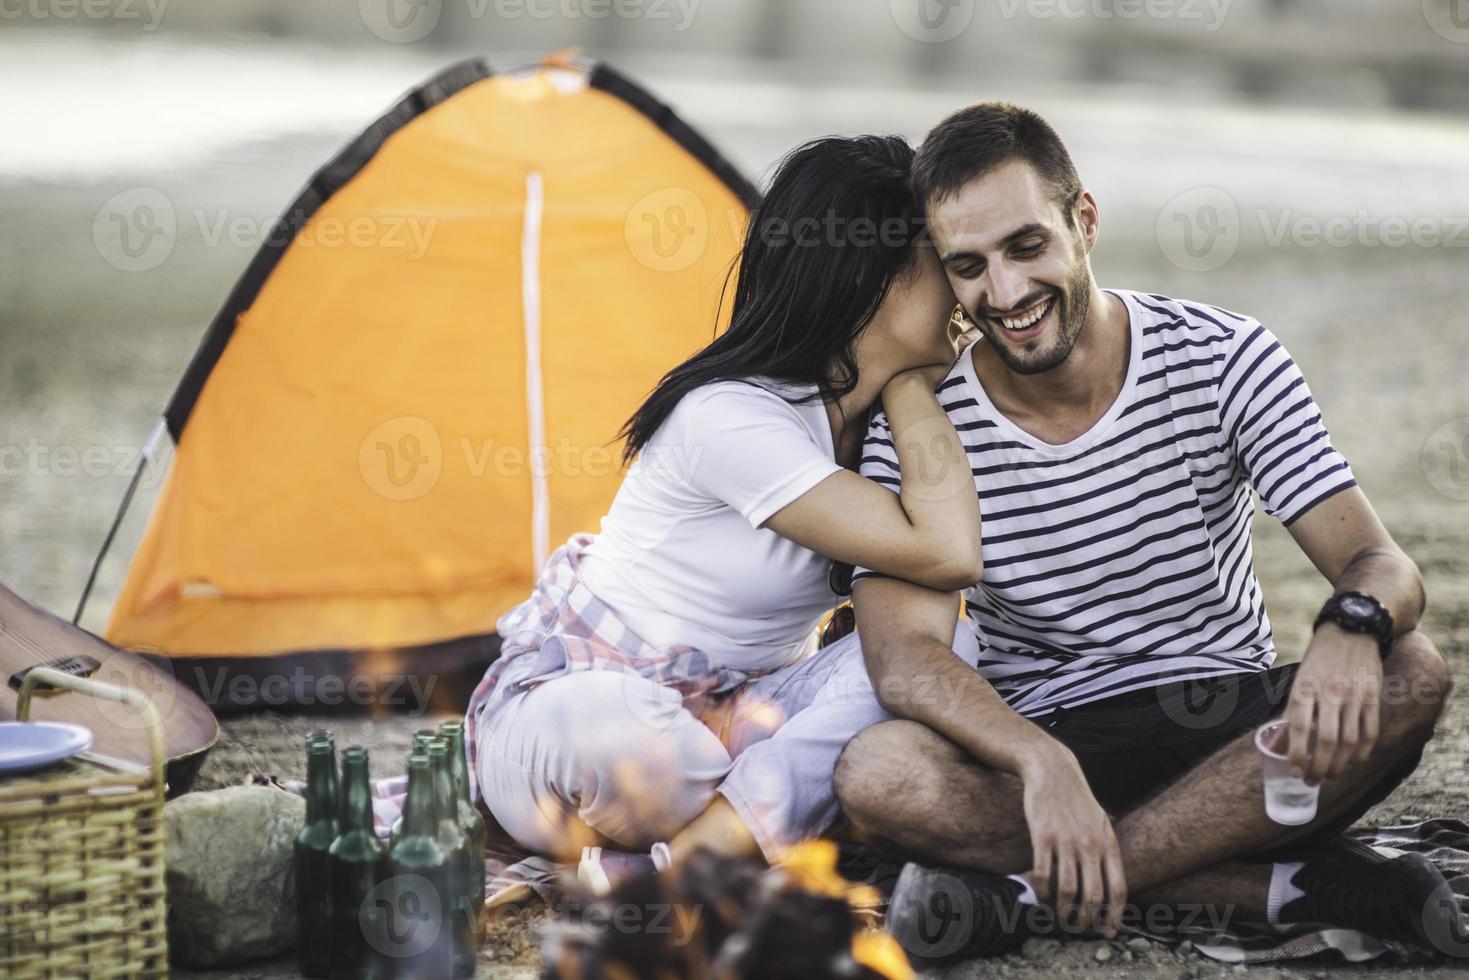 Picnic holiday concept. Beautiful couple having fun making BBQ on bonfire and relaxing by a lake. photo